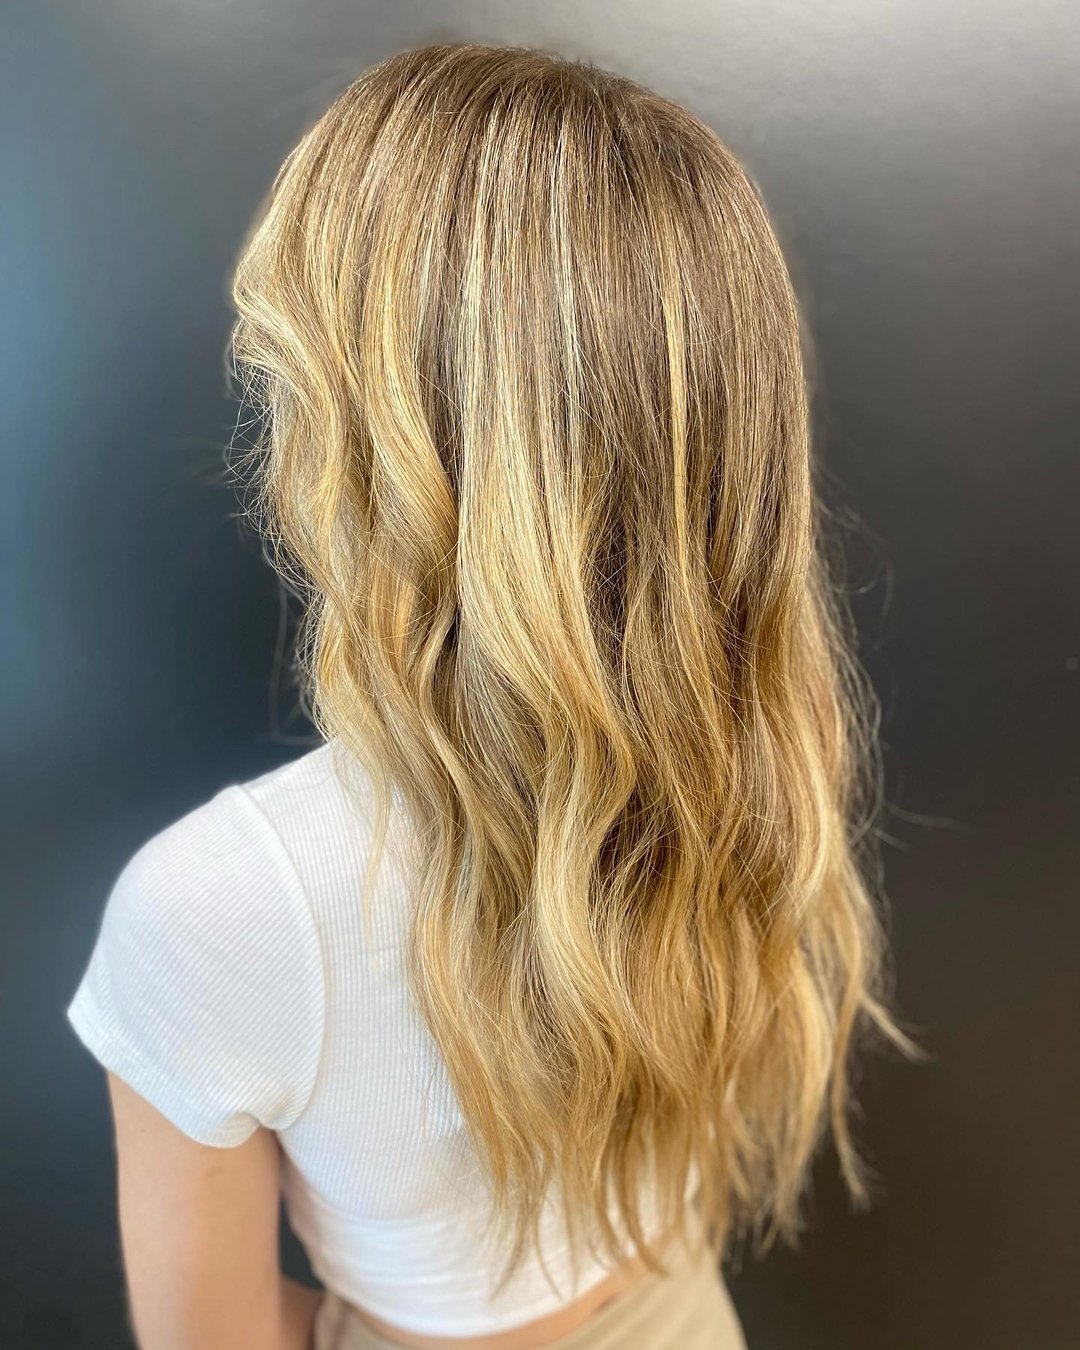 That buttery 🧈 summer blonde! Partial balayage and blend for this sweetie!
@chloexhair